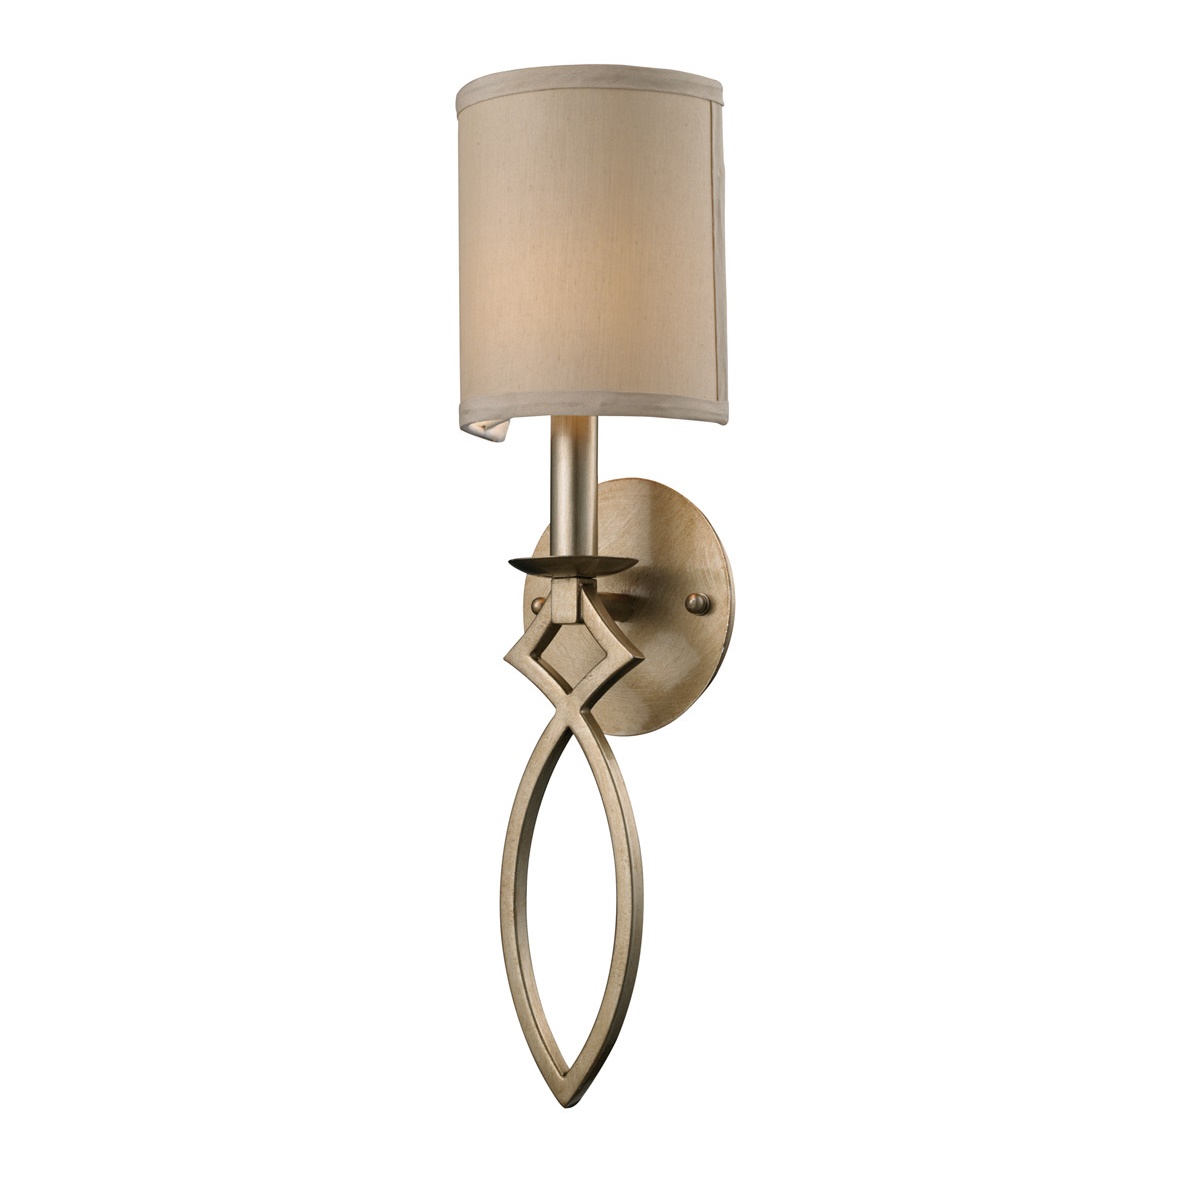 ELK Lighting, Candle Sconces for Walls, Brooklyn, Accentuations Brand, Furniture by ABD